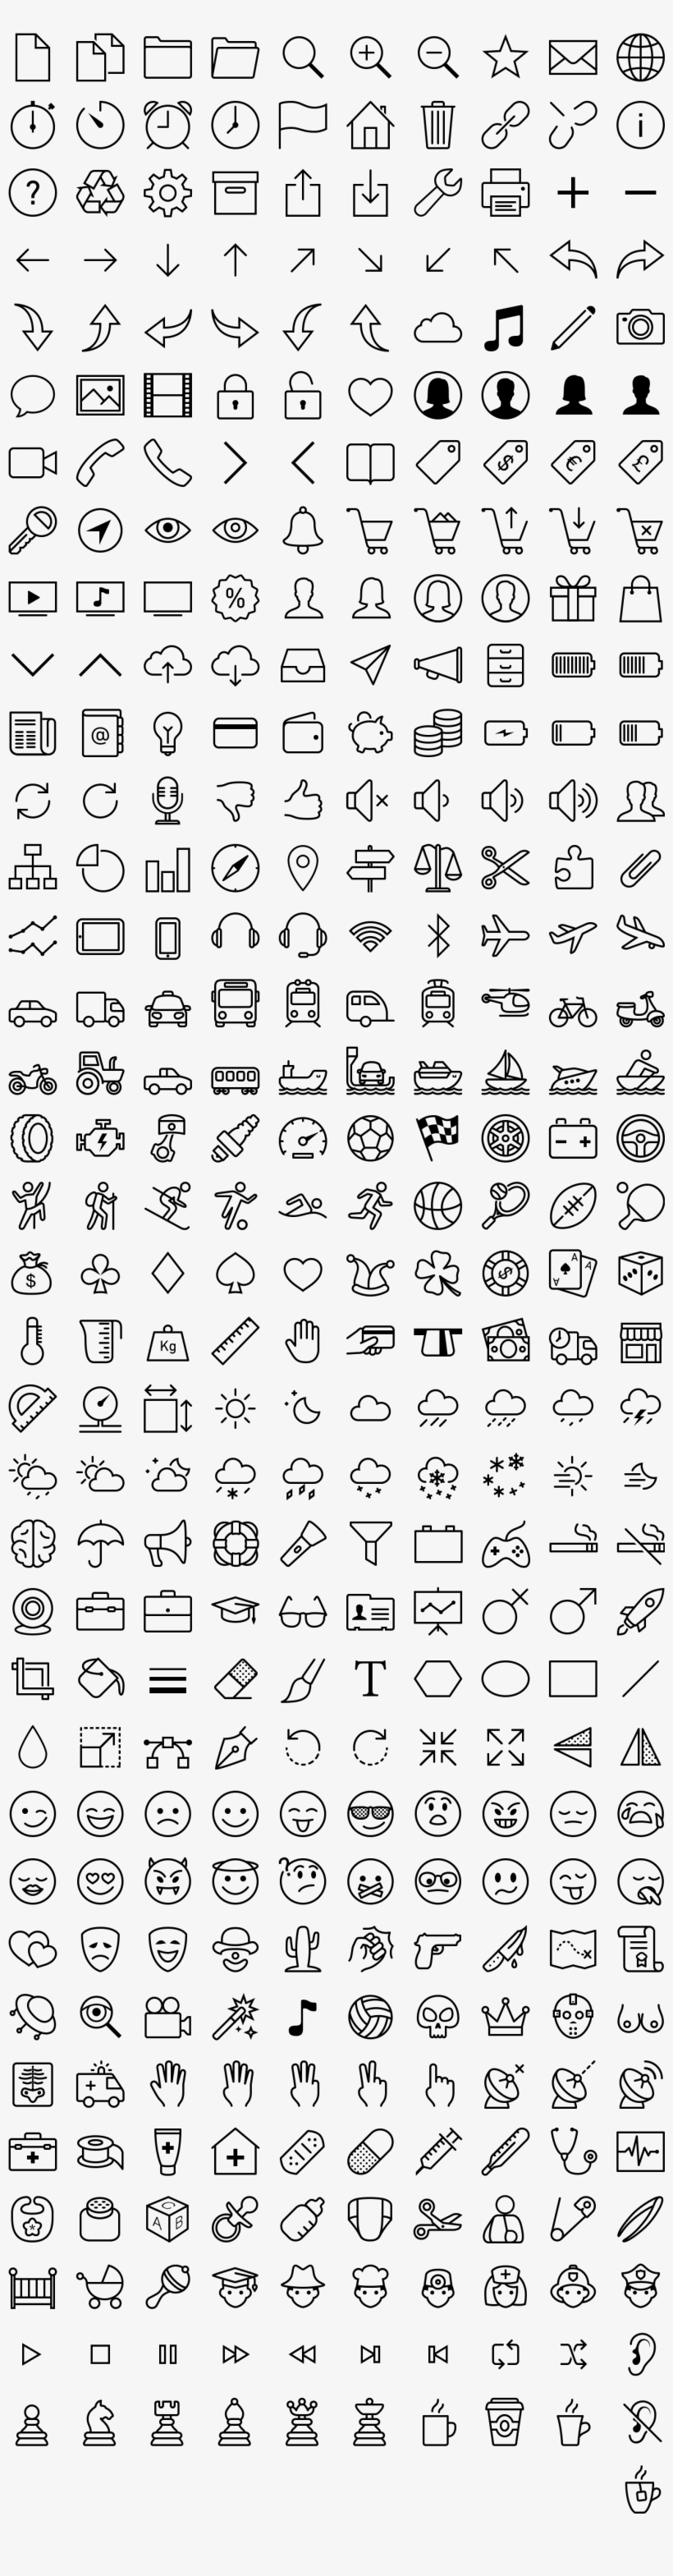 Download Ios 7 Icons In Vector - Simbolos Apuntes, transparent png #2030278